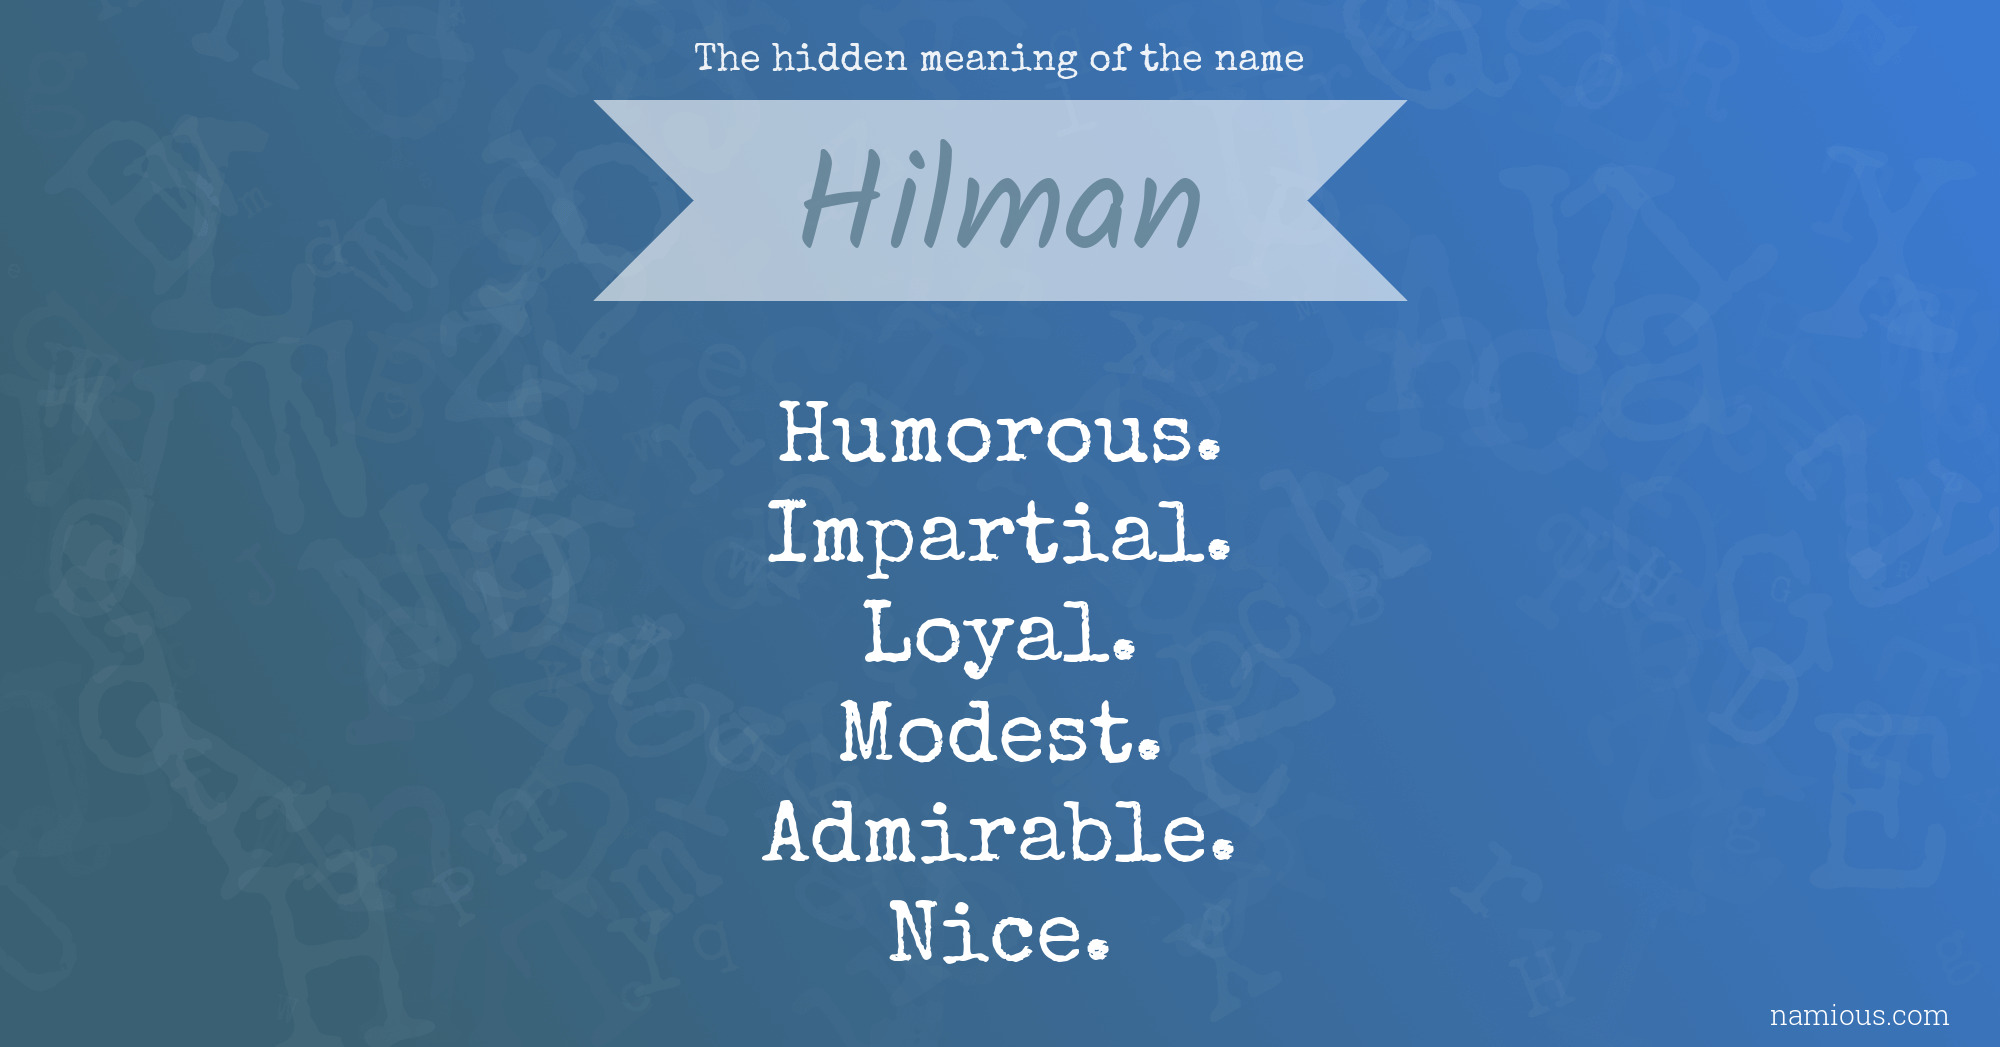 The hidden meaning of the name Hilman